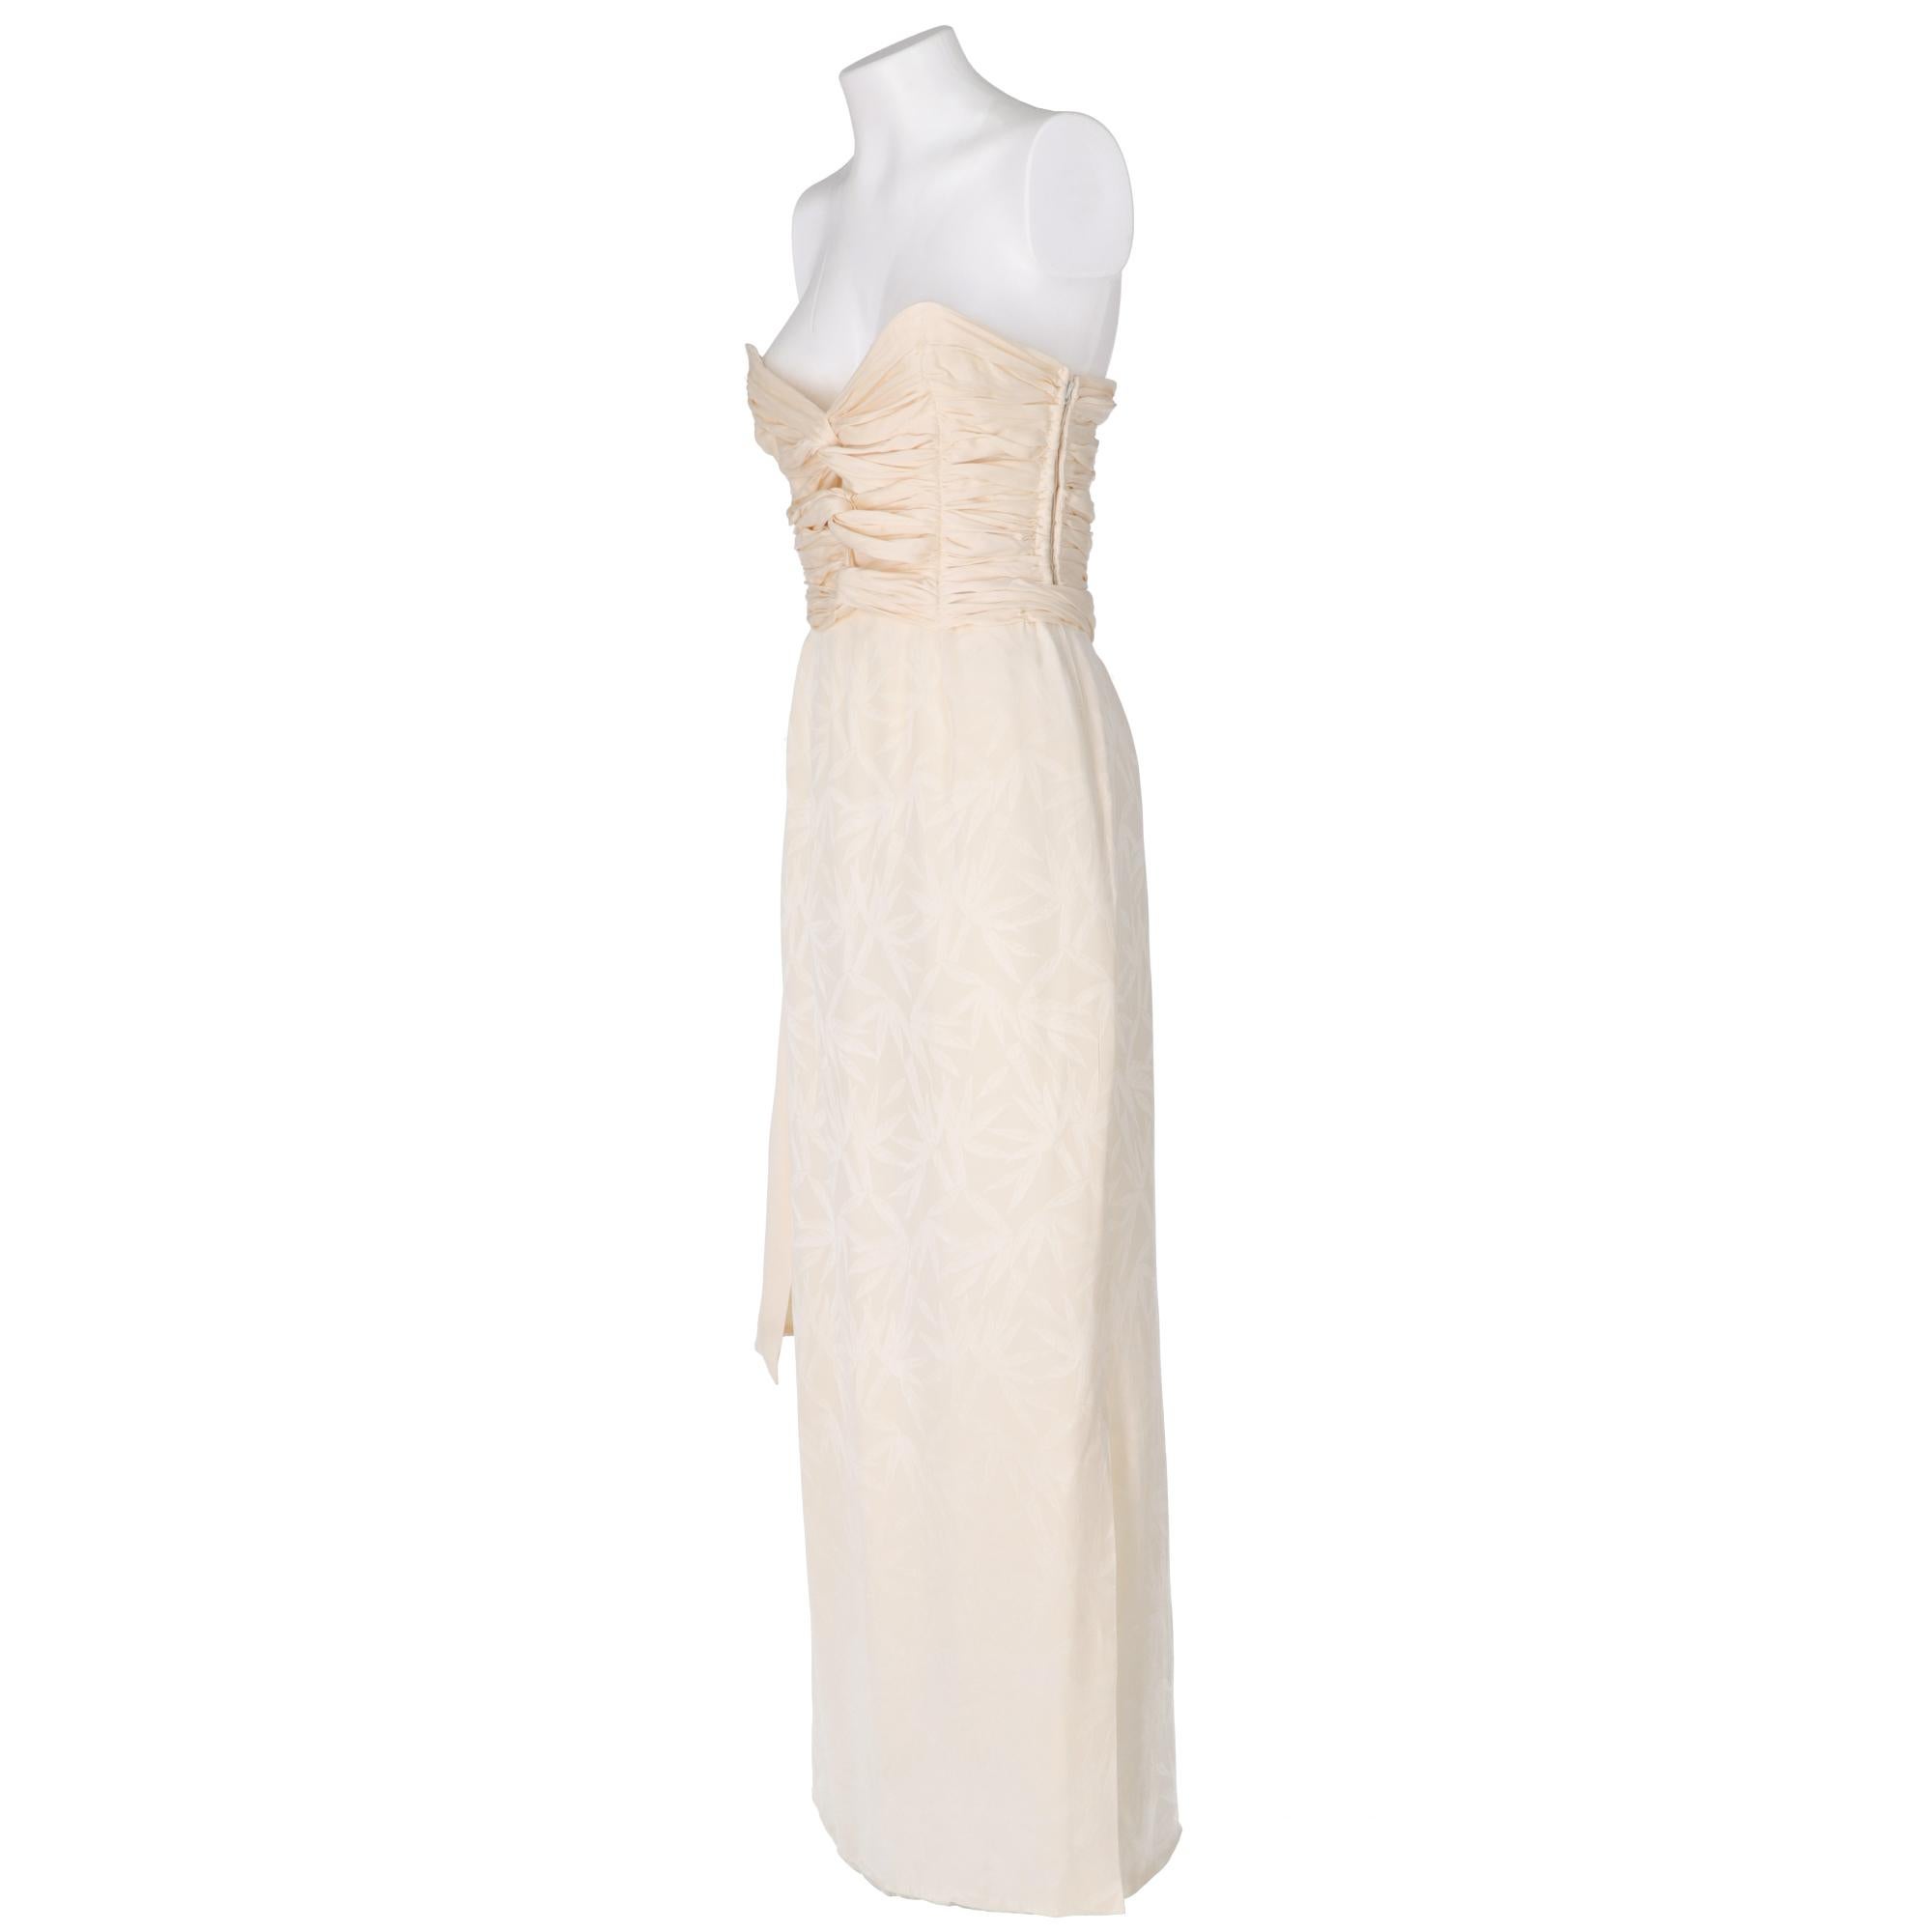 Ivory tailored wedding dress, with straight long skirt up to the feet in jacquard fabric with floral motif, heart neckline and top with curled and knotted fabric, decorative belt, zip closure on the side.

Years: 1990s

Size: 42 IT

Linear